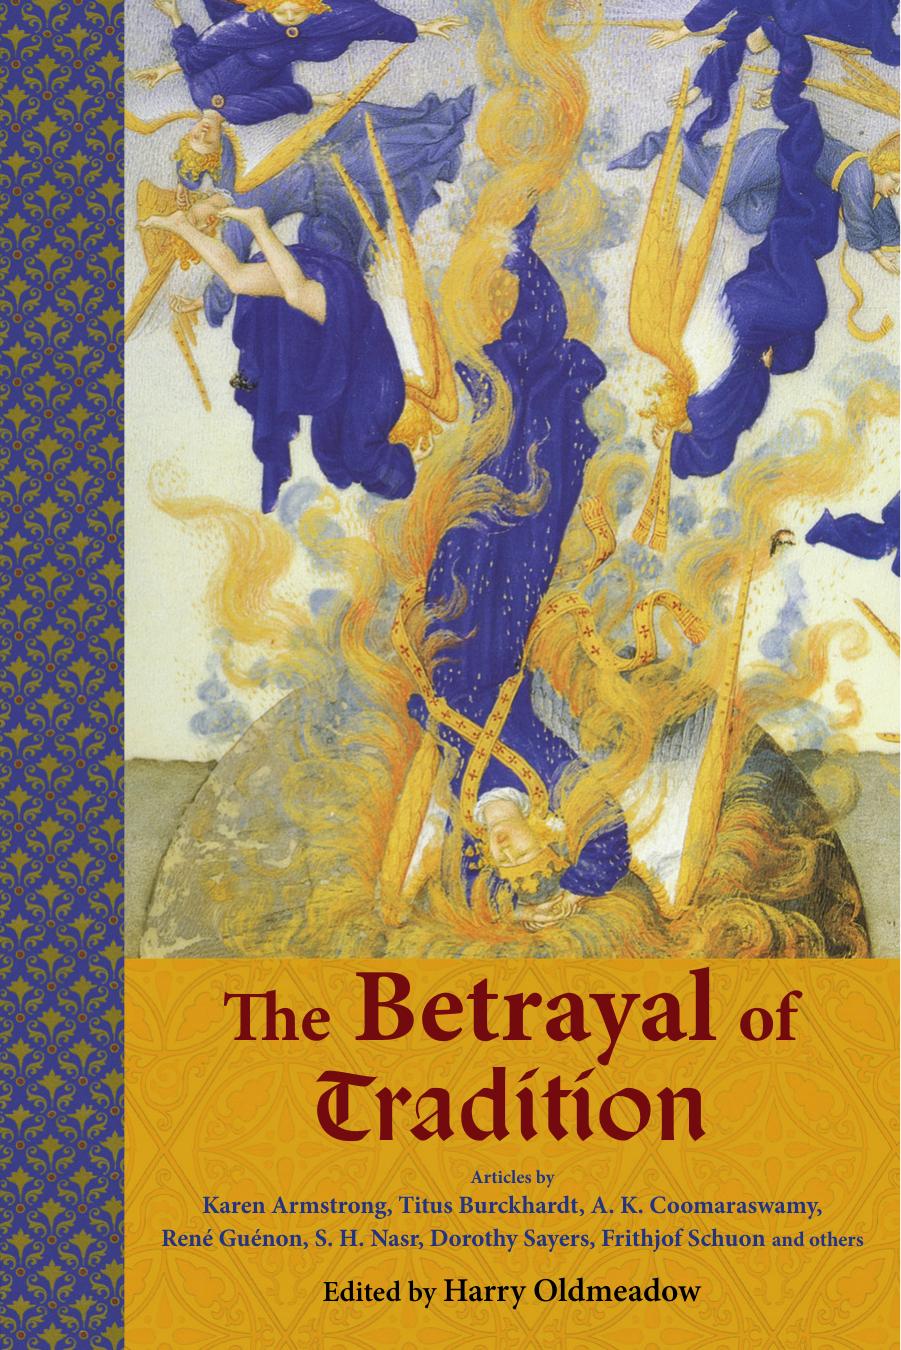 The Betrayal of Tradition: Essays on the Spiritual Crisis of Modernity